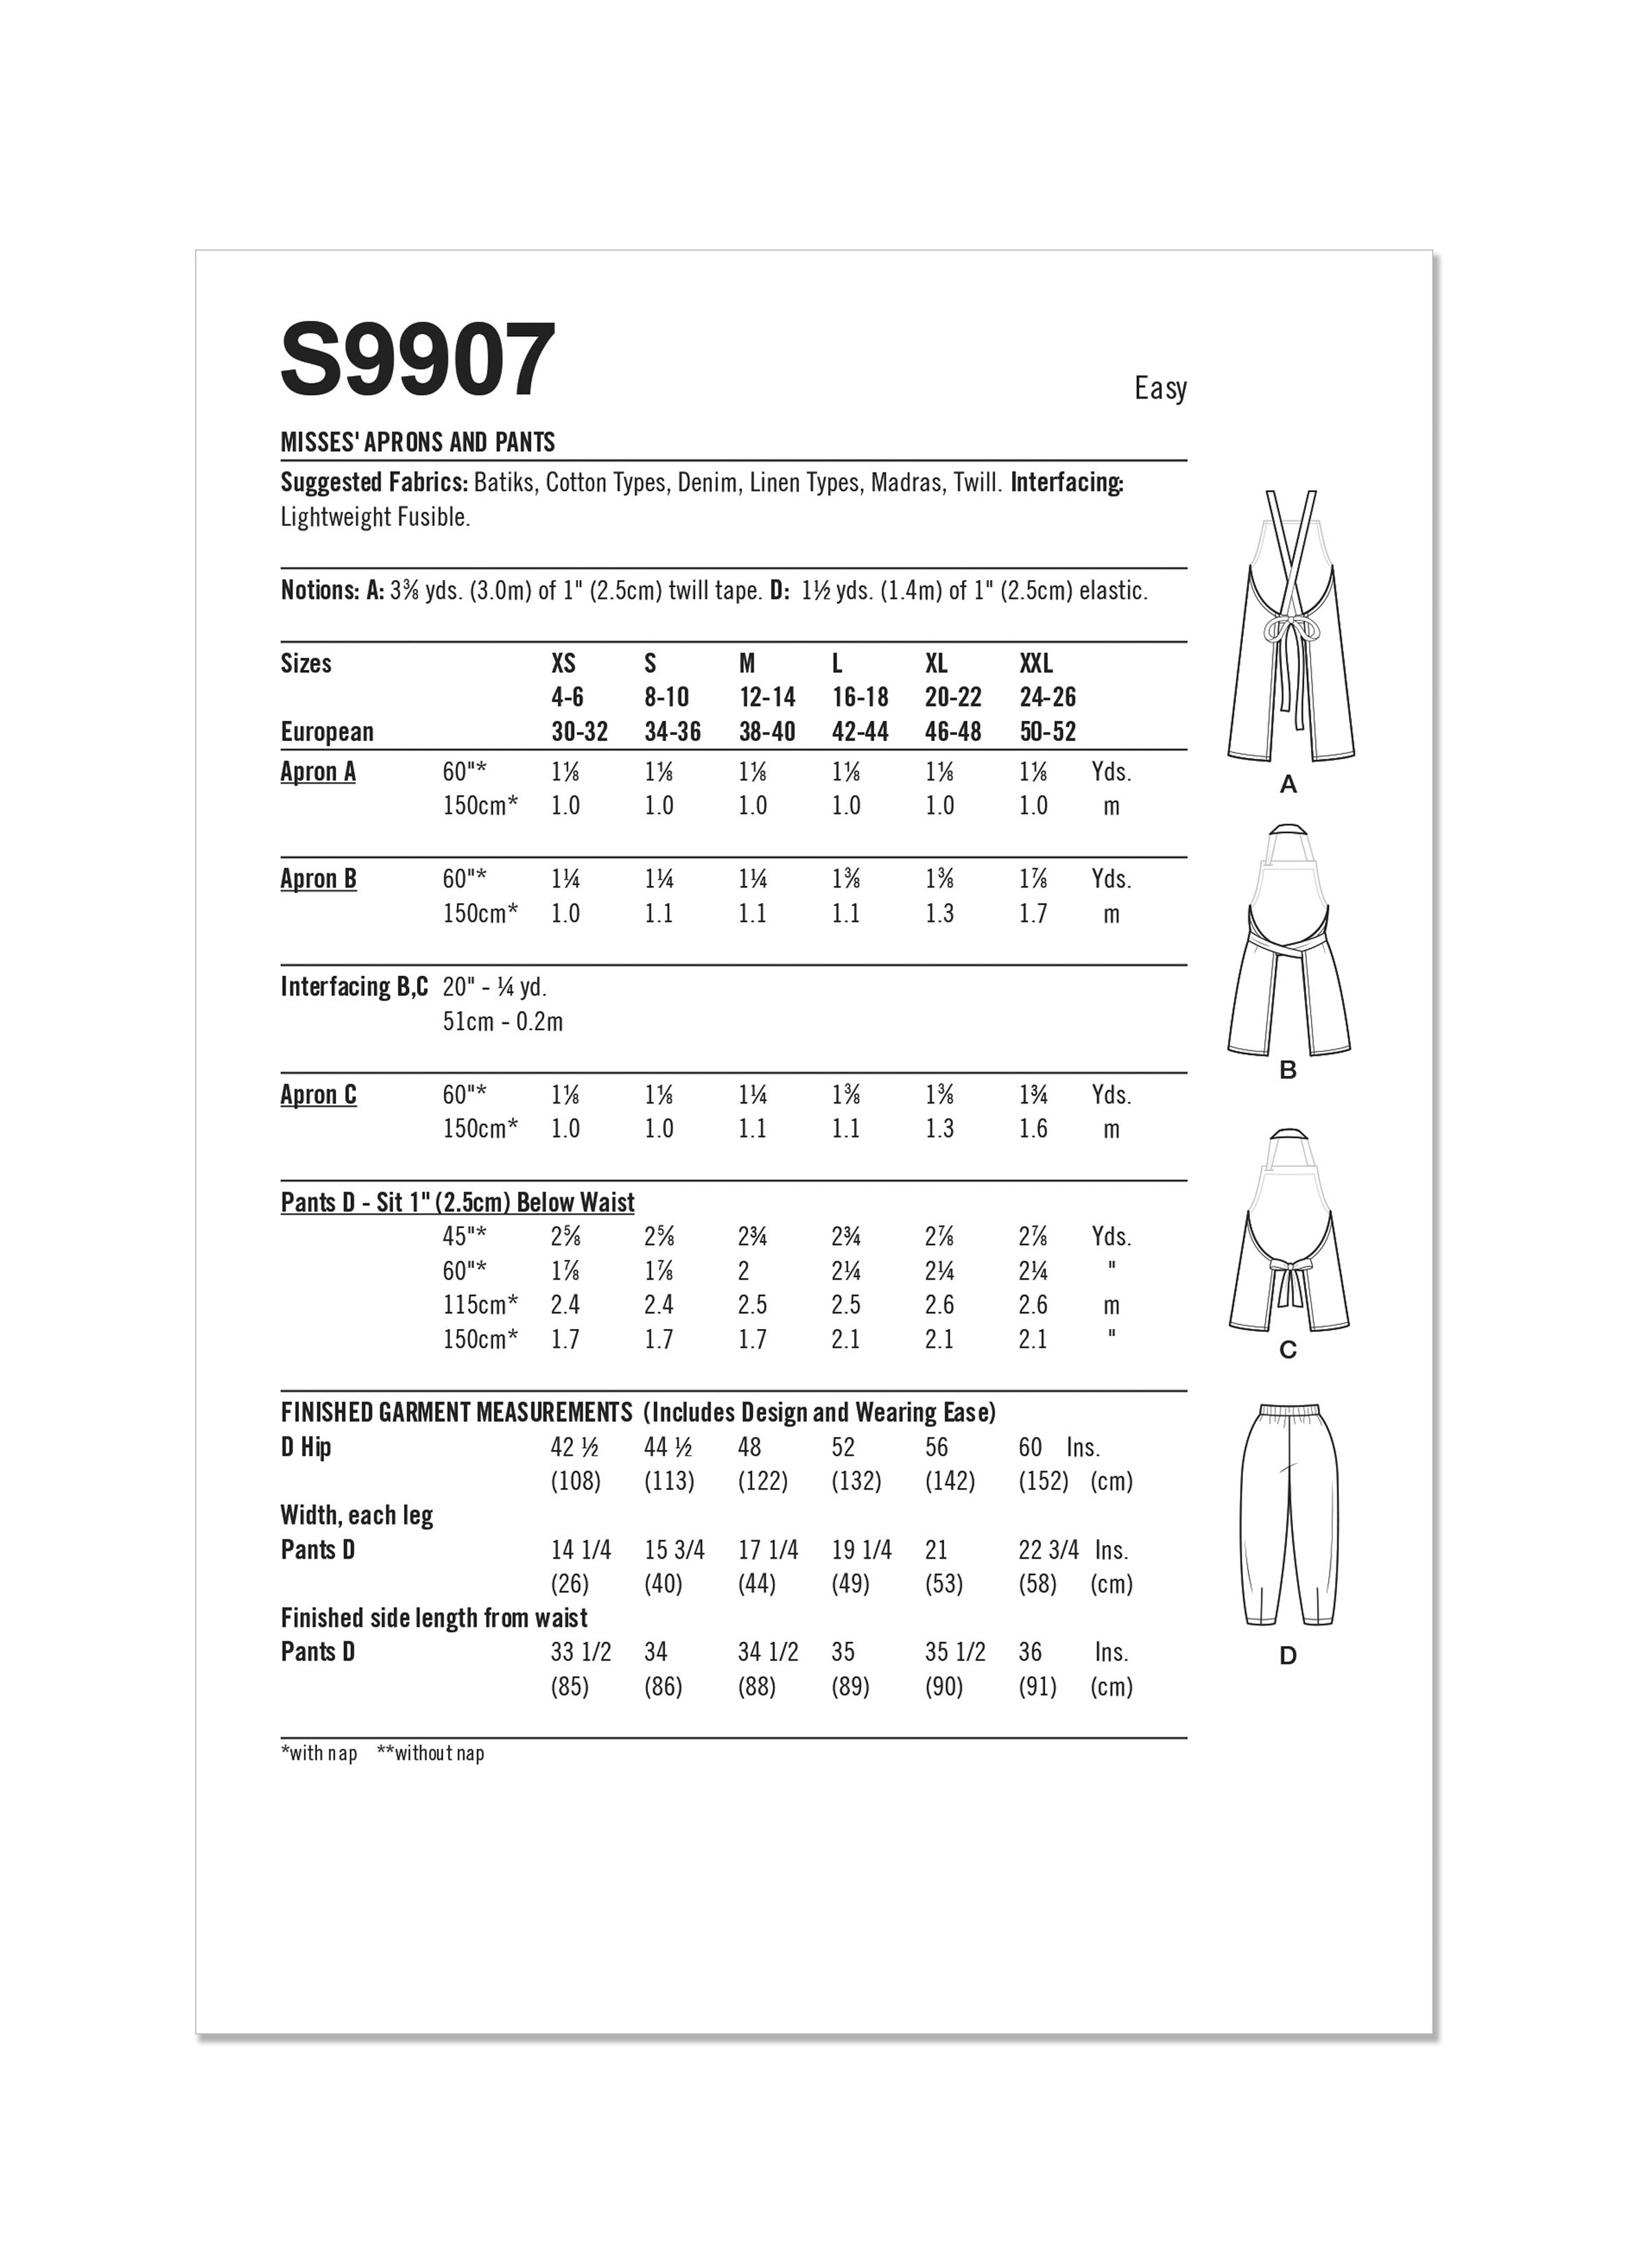 Simplicity Sewing Pattern 9907 Misses' Aprons and Pants By Elaine Heigl Designs from Jaycotts Sewing Supplies